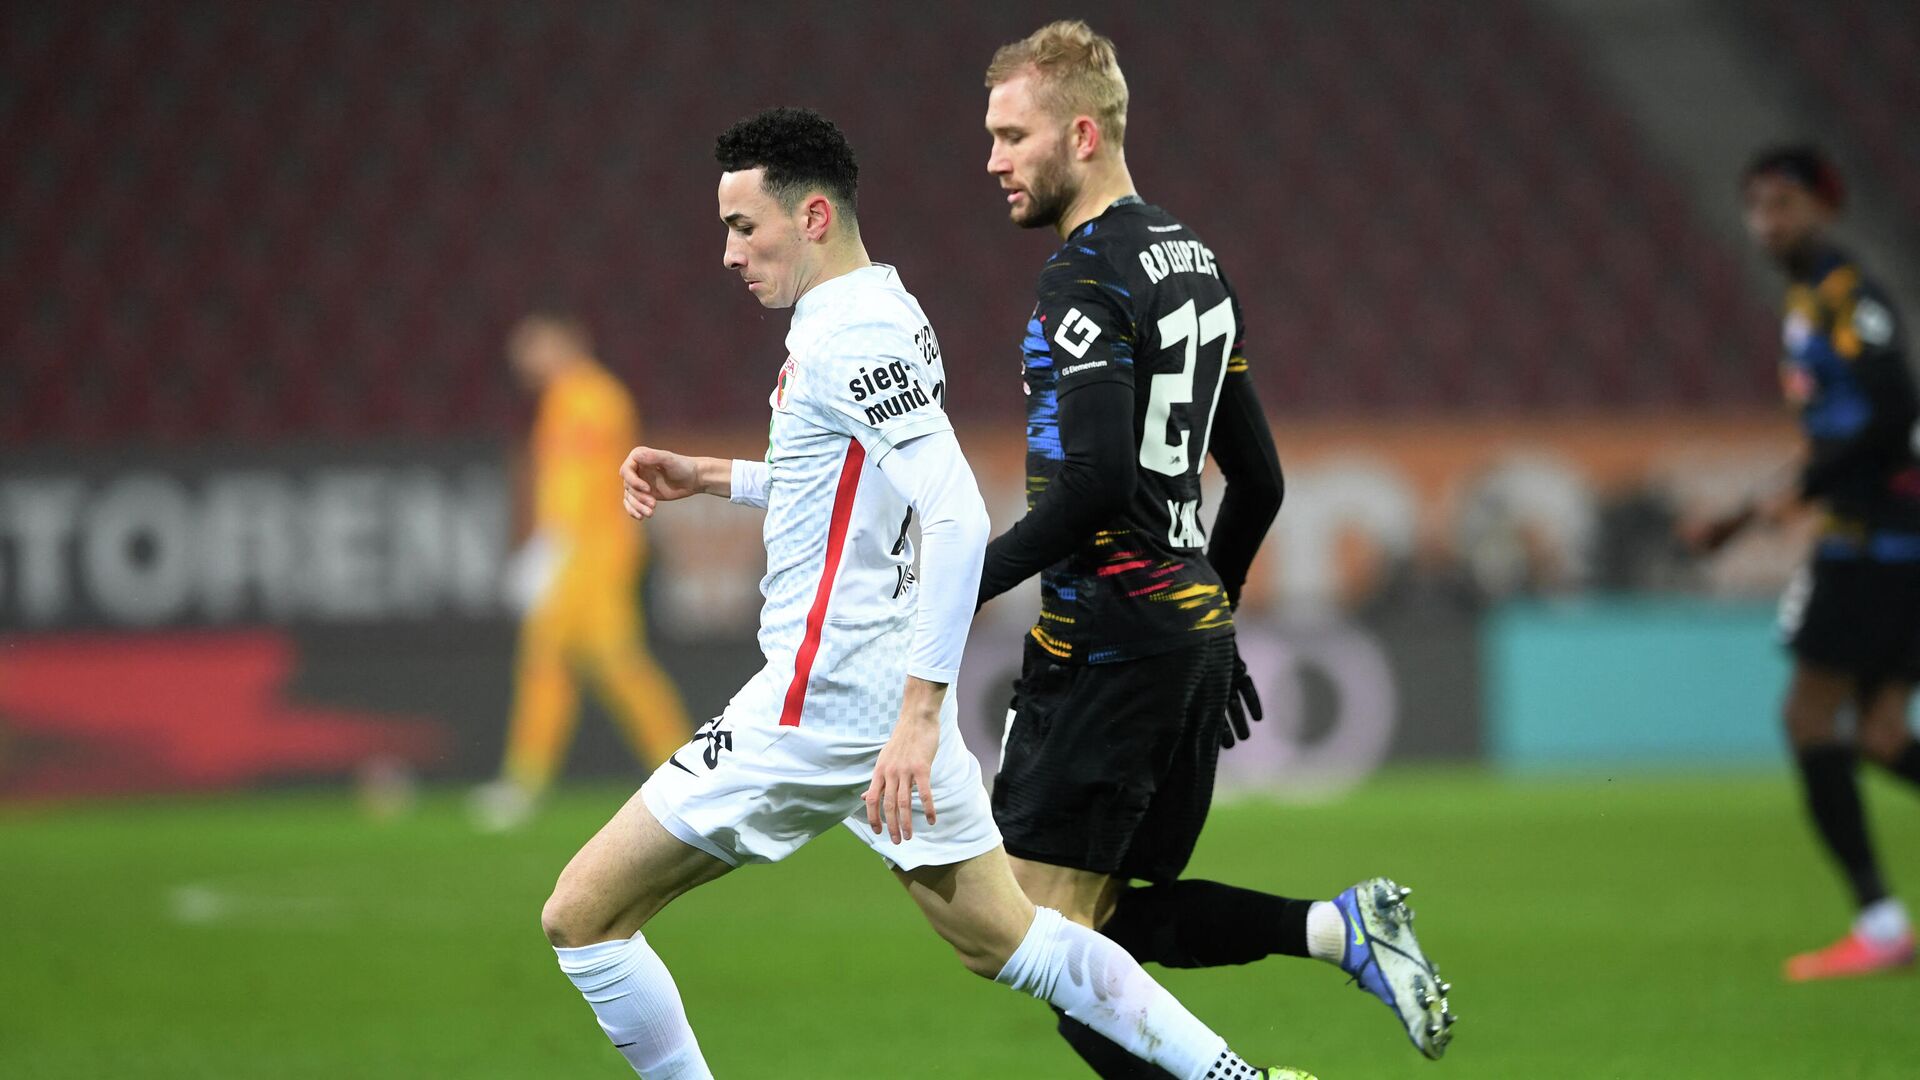 Leipzig's Austrian midfielder Konrad Laimer (R) and Augsburg's Swiss midfielder Ruben Vargas (L) vie for the ball during the German first division Bundesliga football match Augsburg vs RB Leipzig in Augsburg, southern Germany, on December 15, 2021. (Photo by Christof STACHE / AFP) / DFL REGULATIONS PROHIBIT ANY USE OF PHOTOGRAPHS AS IMAGE SEQUENCES AND/OR QUASI-VIDEO - РИА Новости, 1920, 16.12.2021